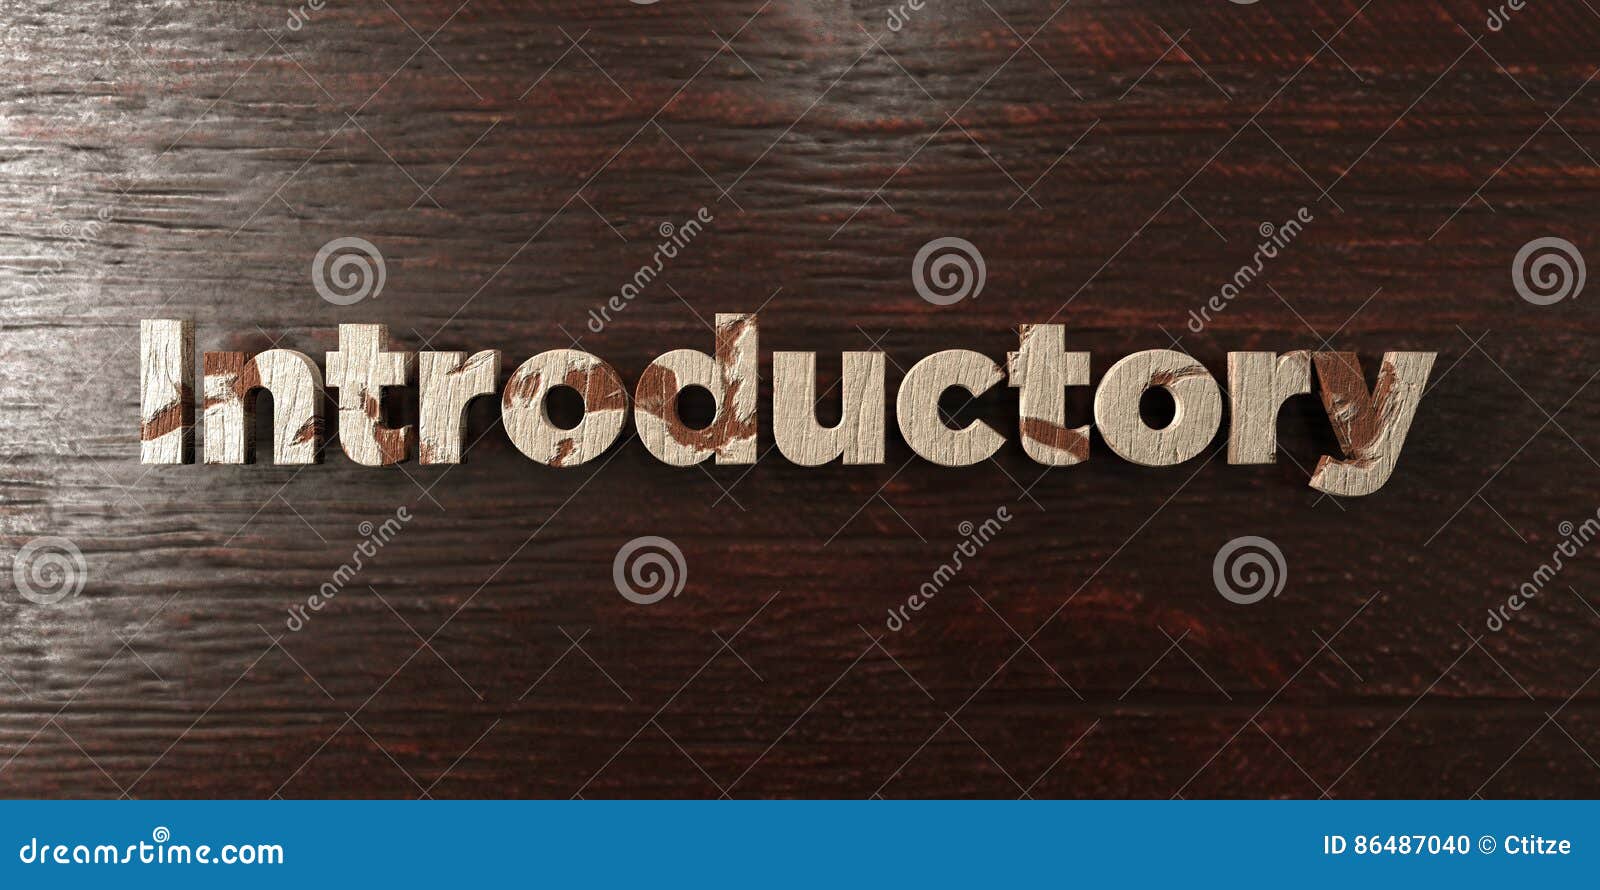 introductory - grungy wooden headline on maple - 3d rendered royalty free stock image